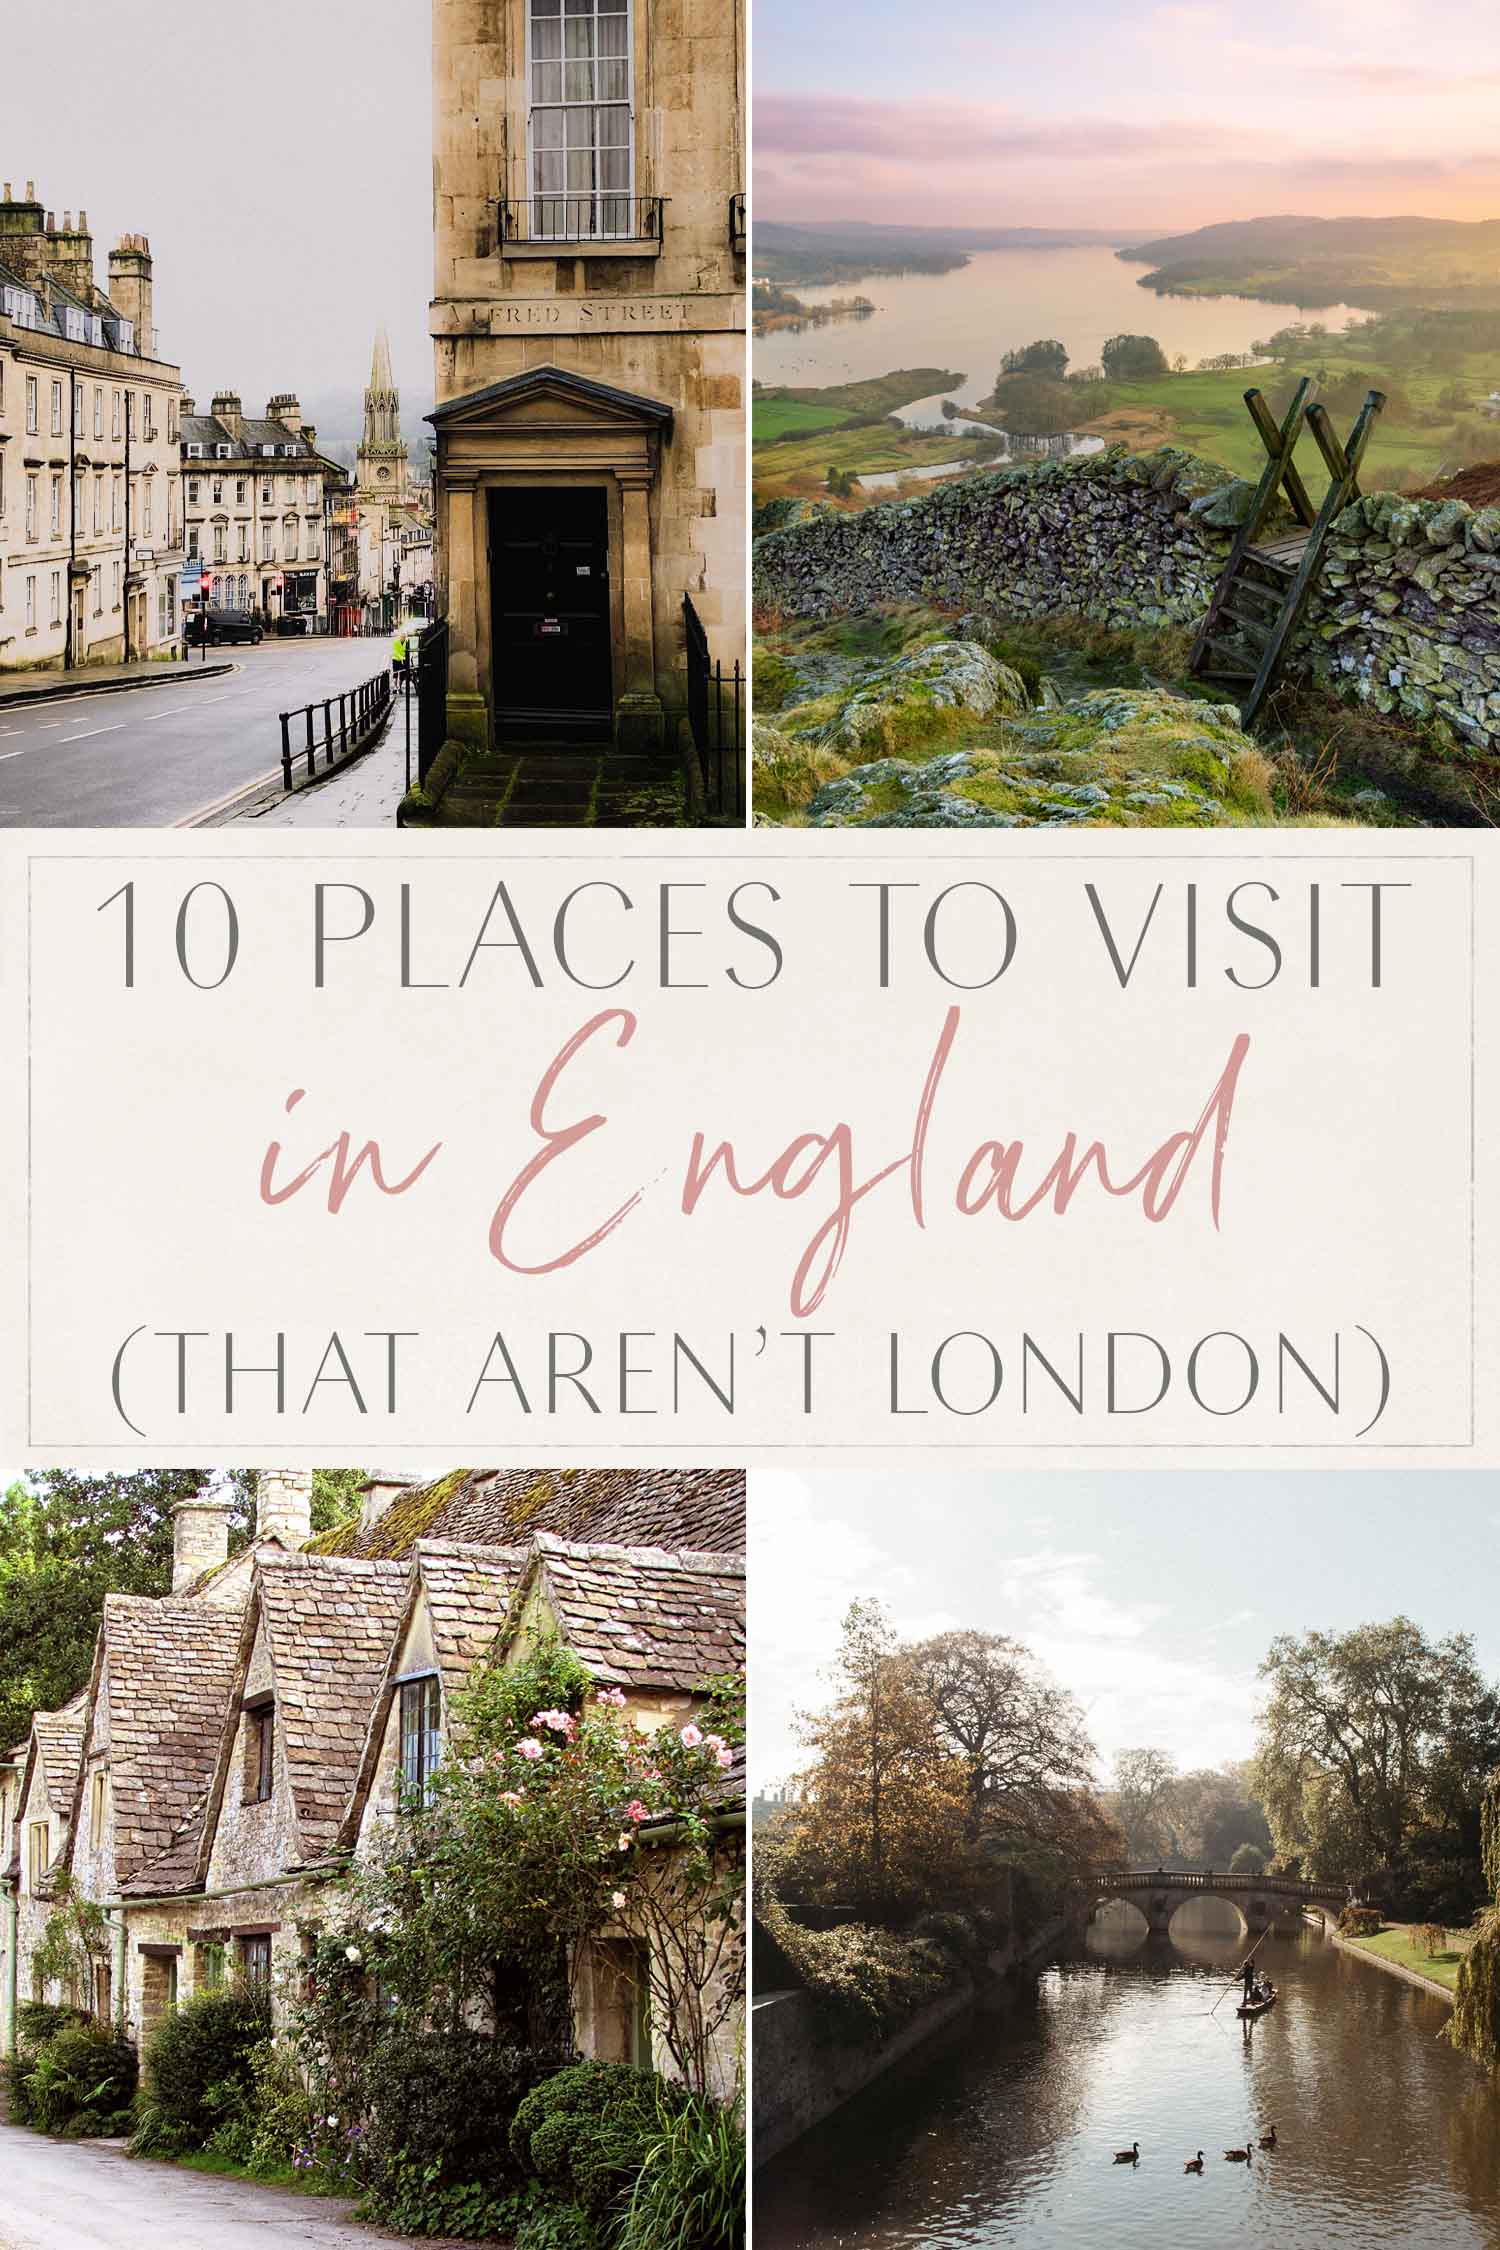 10 Places to Visit in England That Aren't London